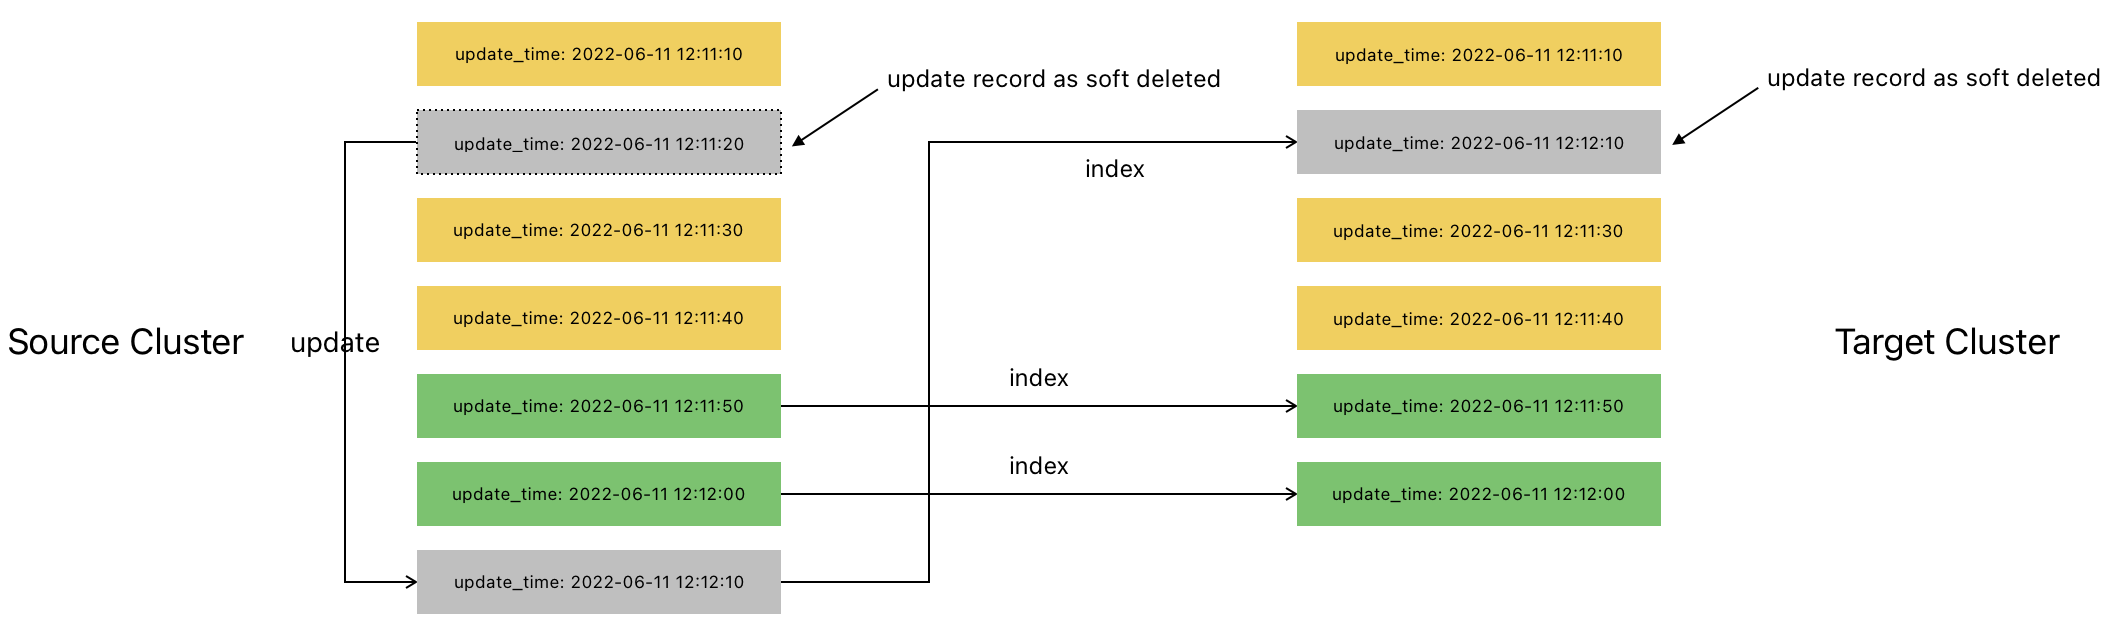 Migration process with soft delete